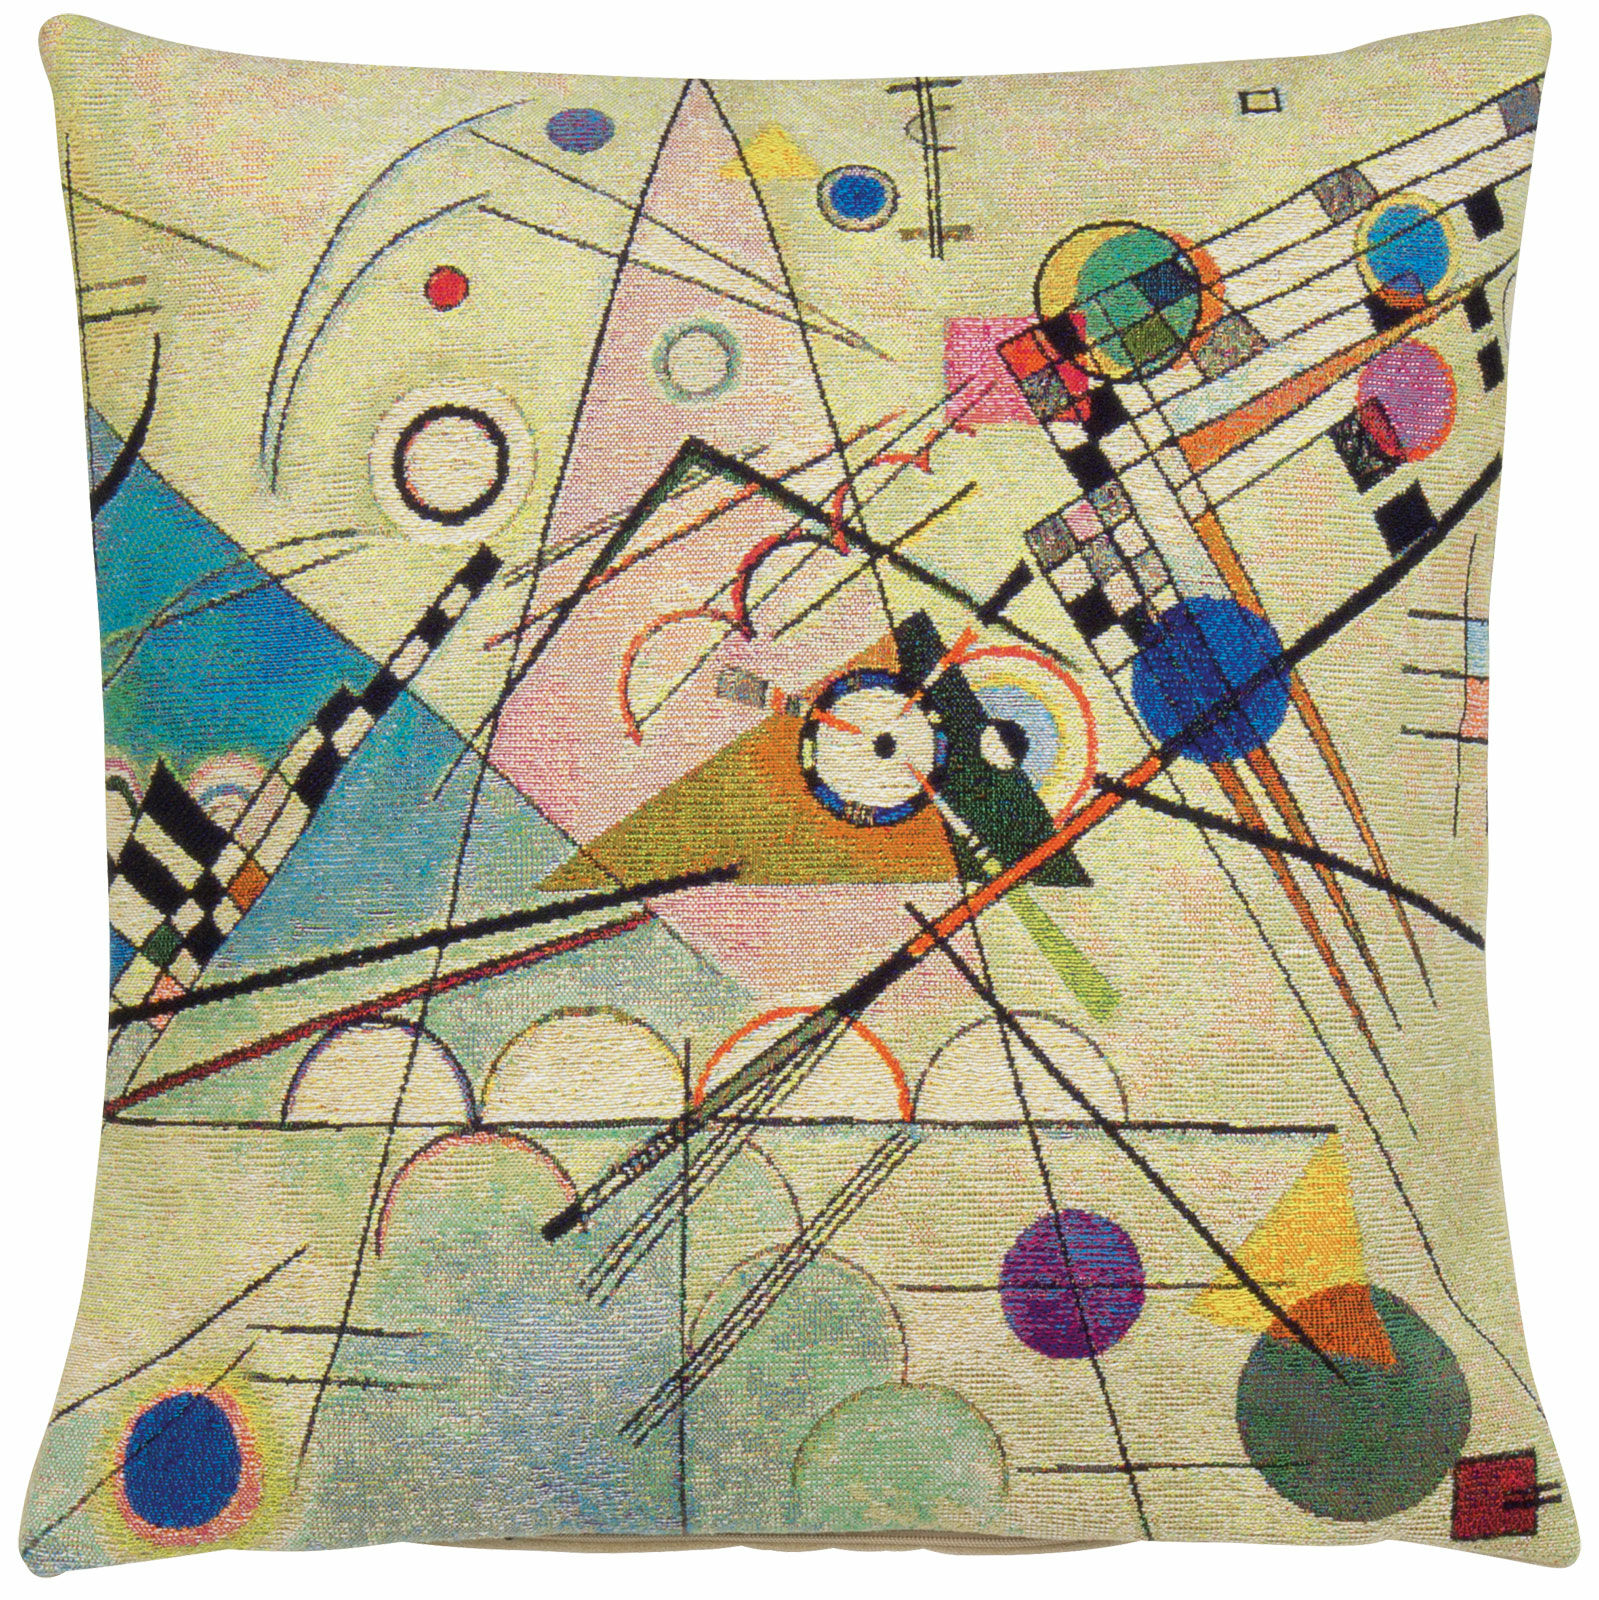 Cushion cover "Composition VIII B" by Wassily Kandinsky